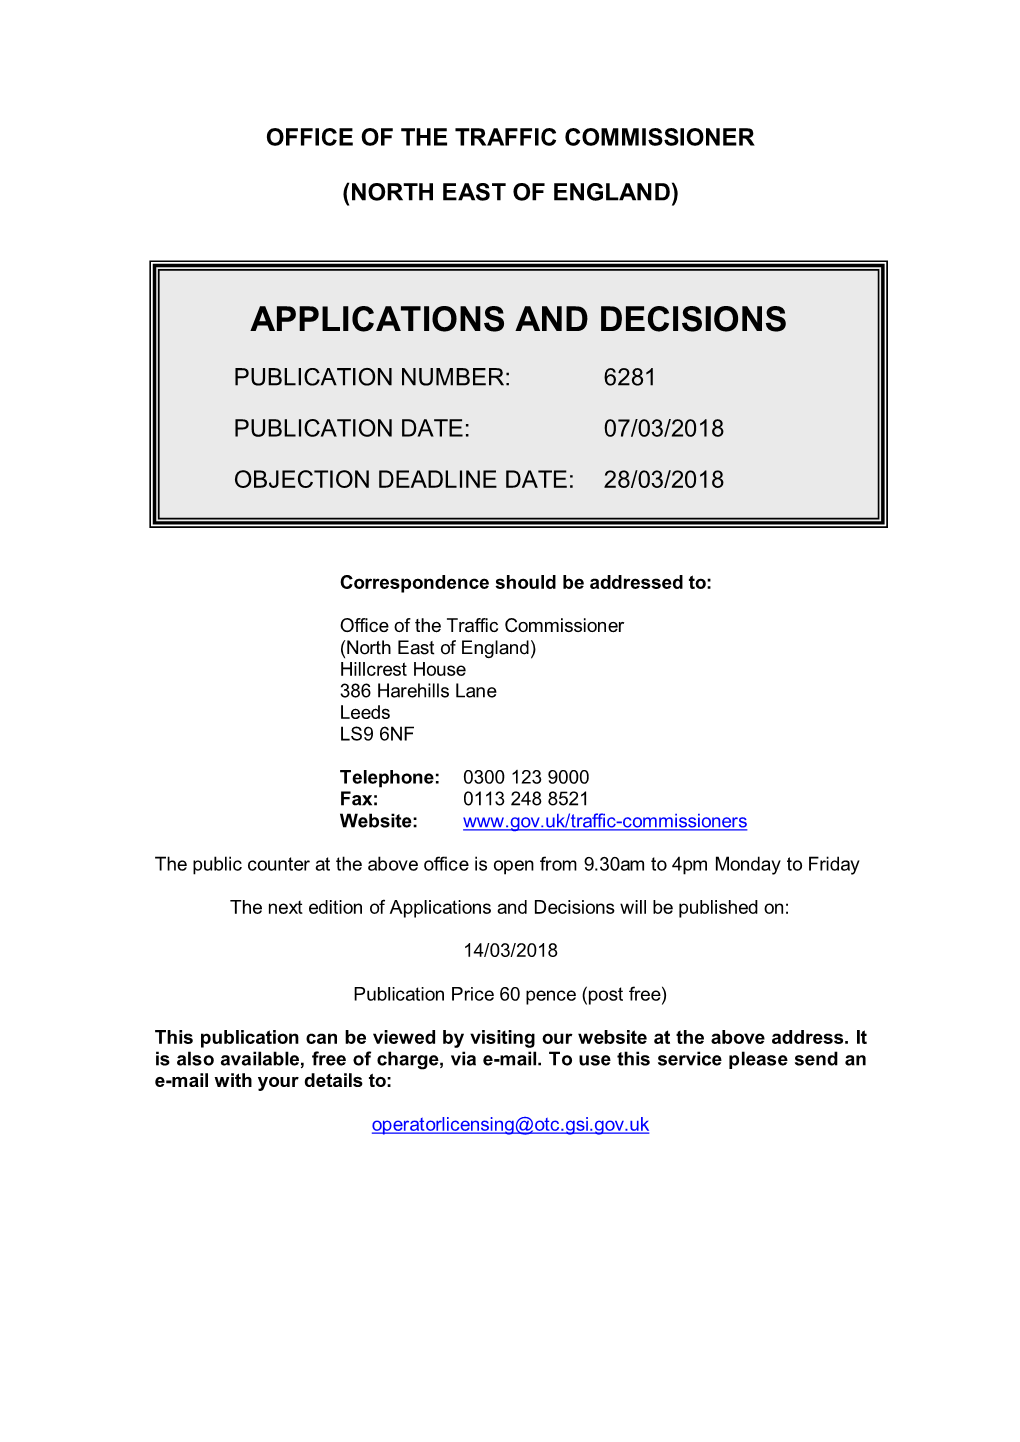 Applications and Decisions 6281: Office of the Traffic Commissioner